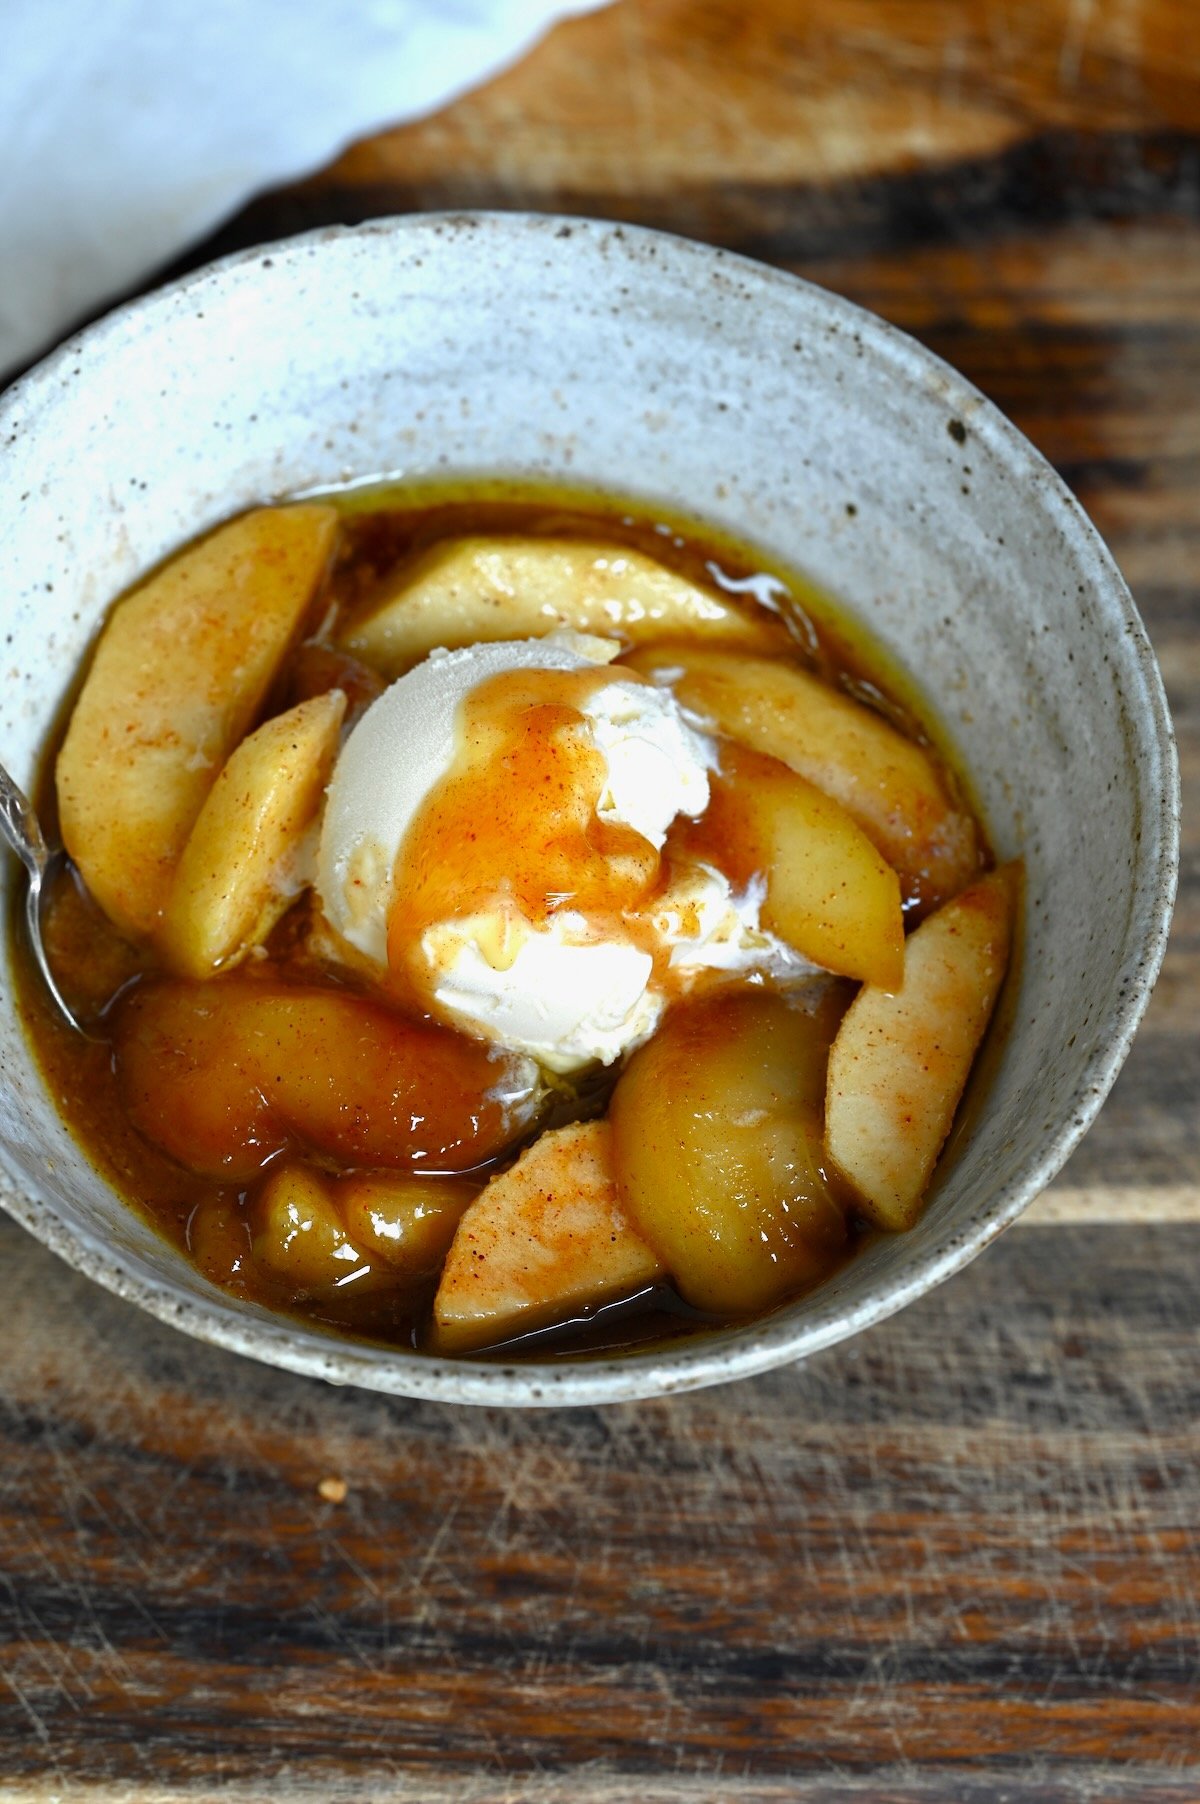 Fried apples topped with ice cream